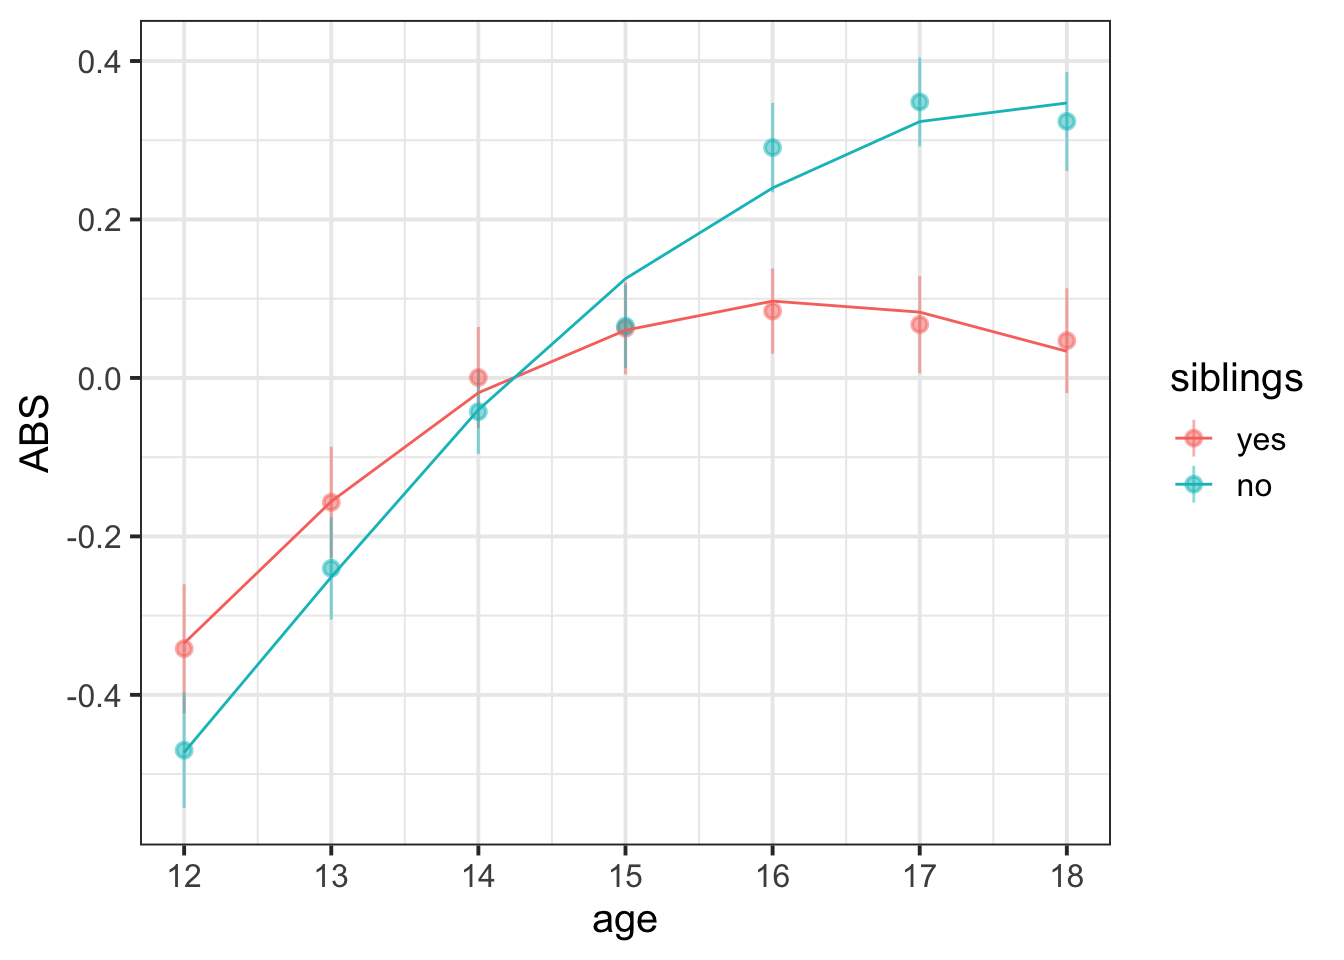 Means and standard errors for ABS scores over age (points), along with average model fitted values (lines)